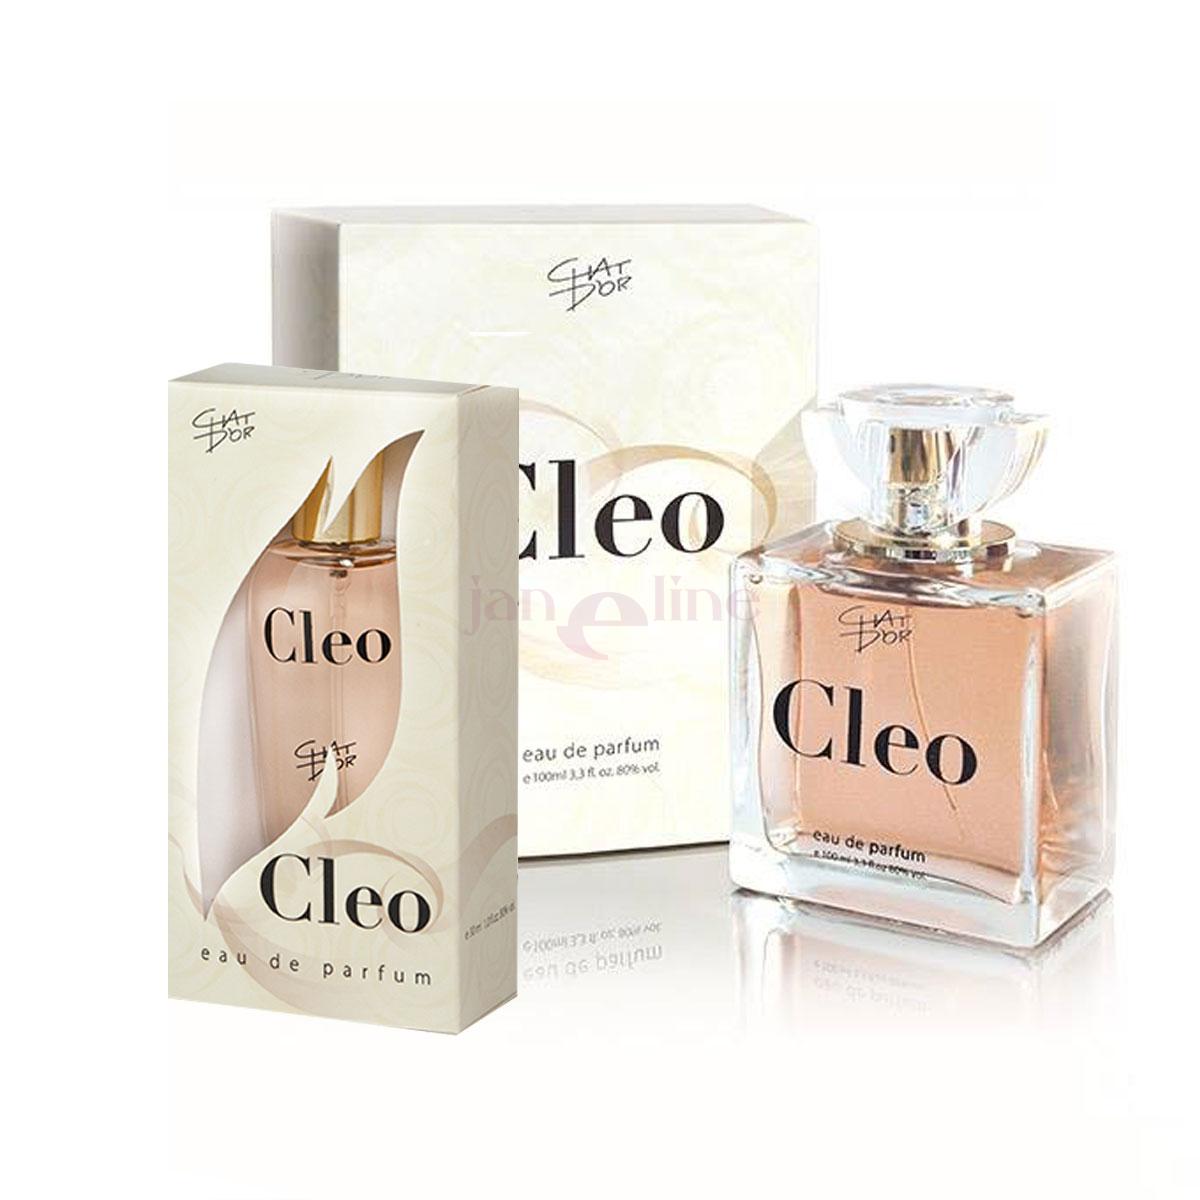 CHAT DOR CLEO duo pack 100+30ml